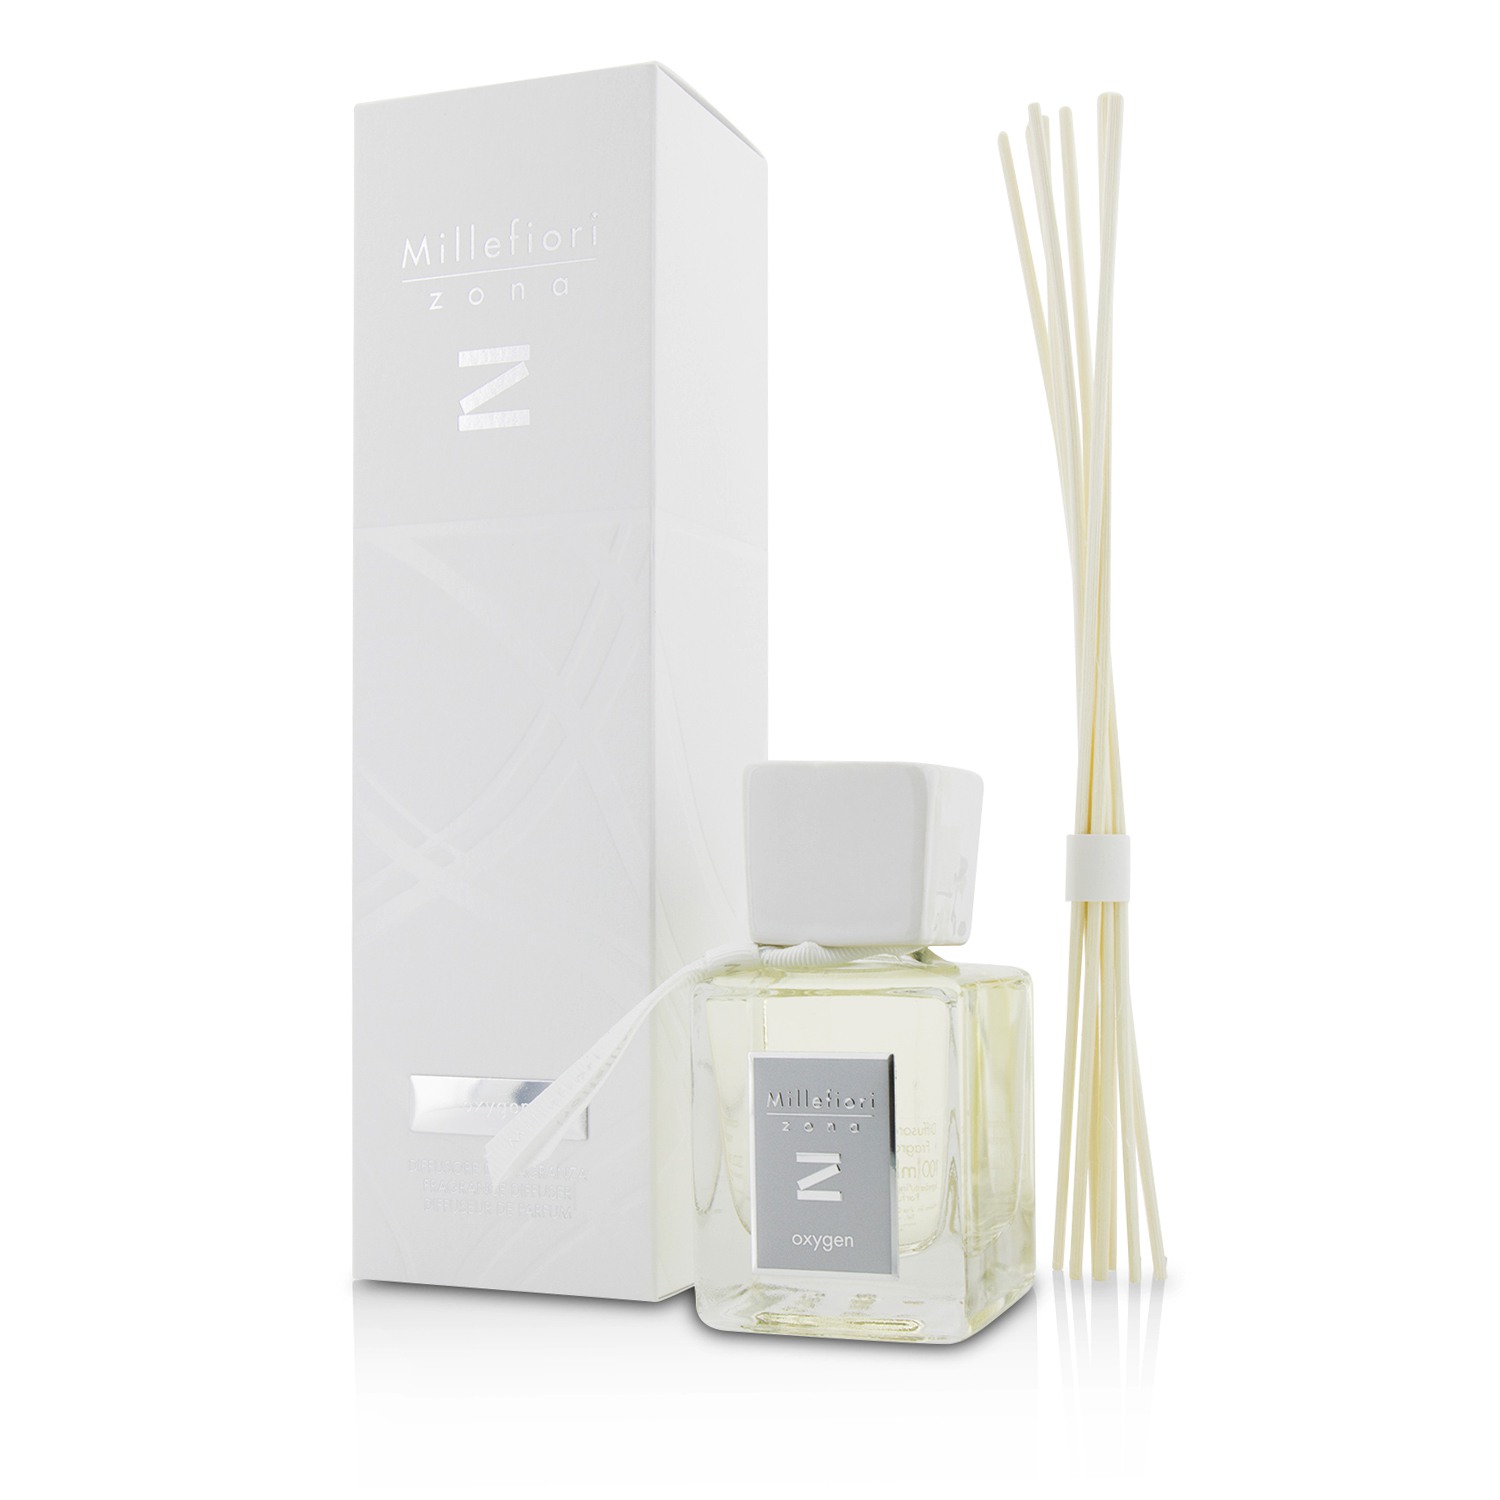 Zona Fragrance Diffuser - Oxygen (New Packaging) Millefiori Image